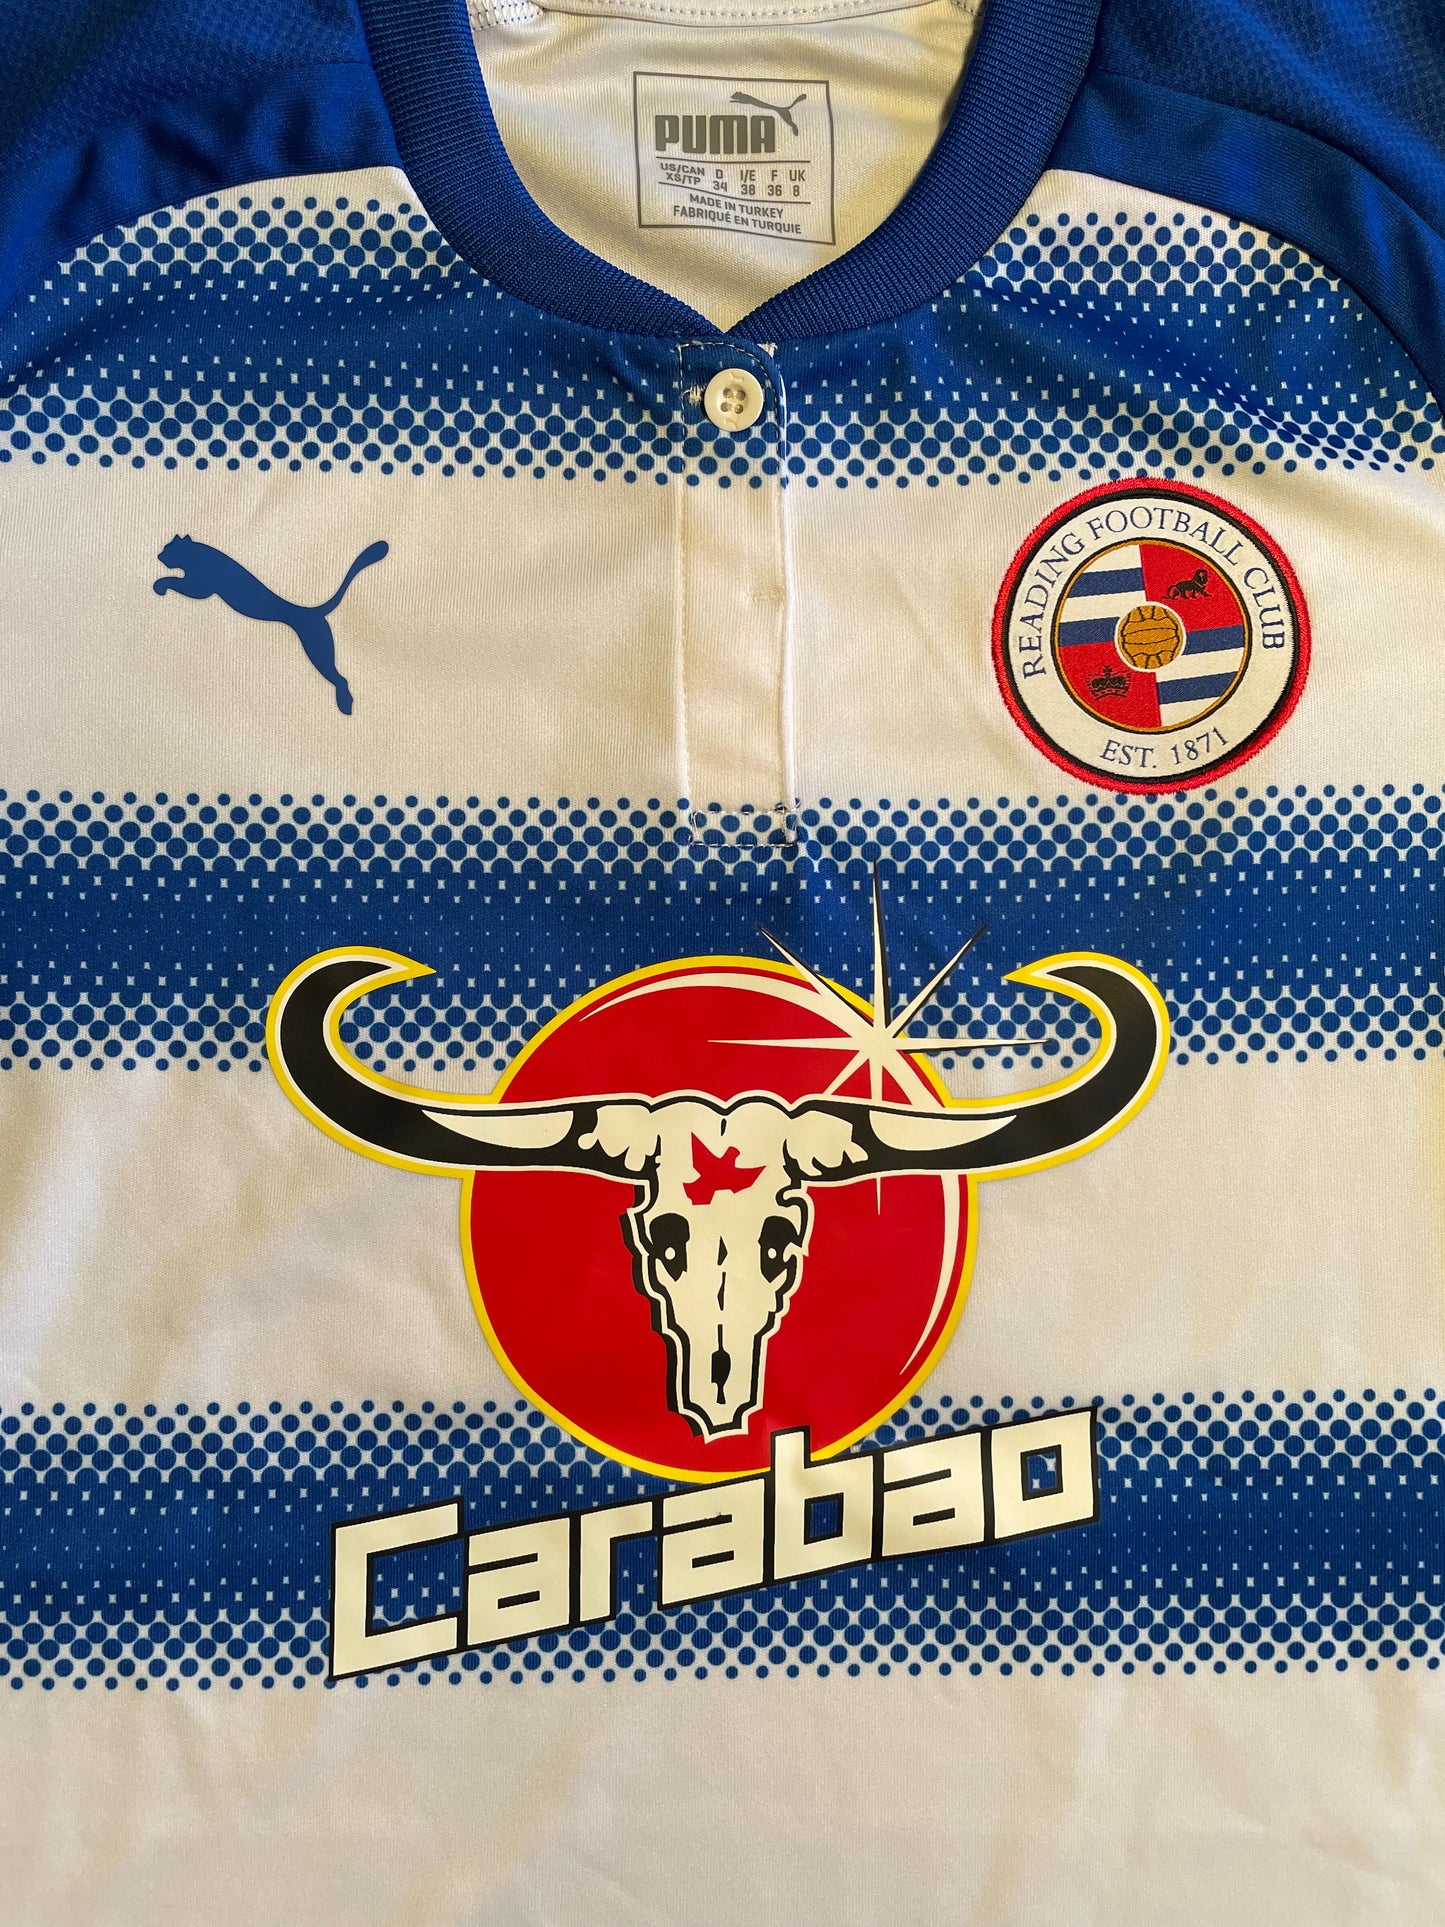 Reading 2017 Home Shirt (excellent) Ladies size 8. Height 19 inches